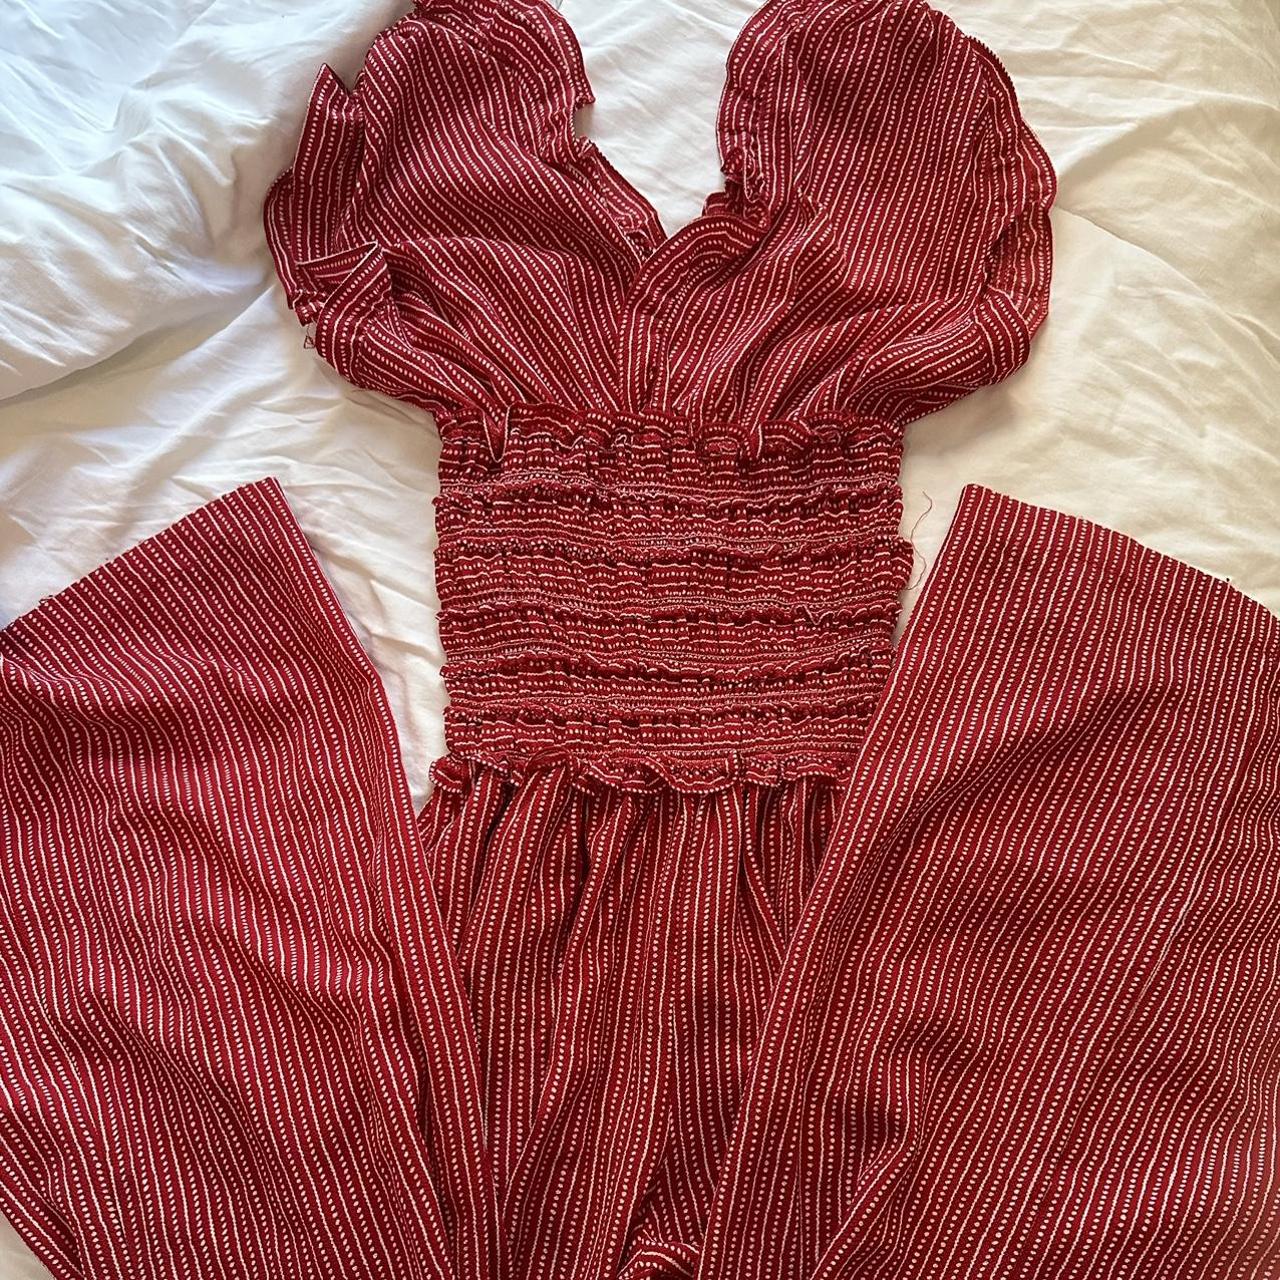 item listed by natalie_thrifting